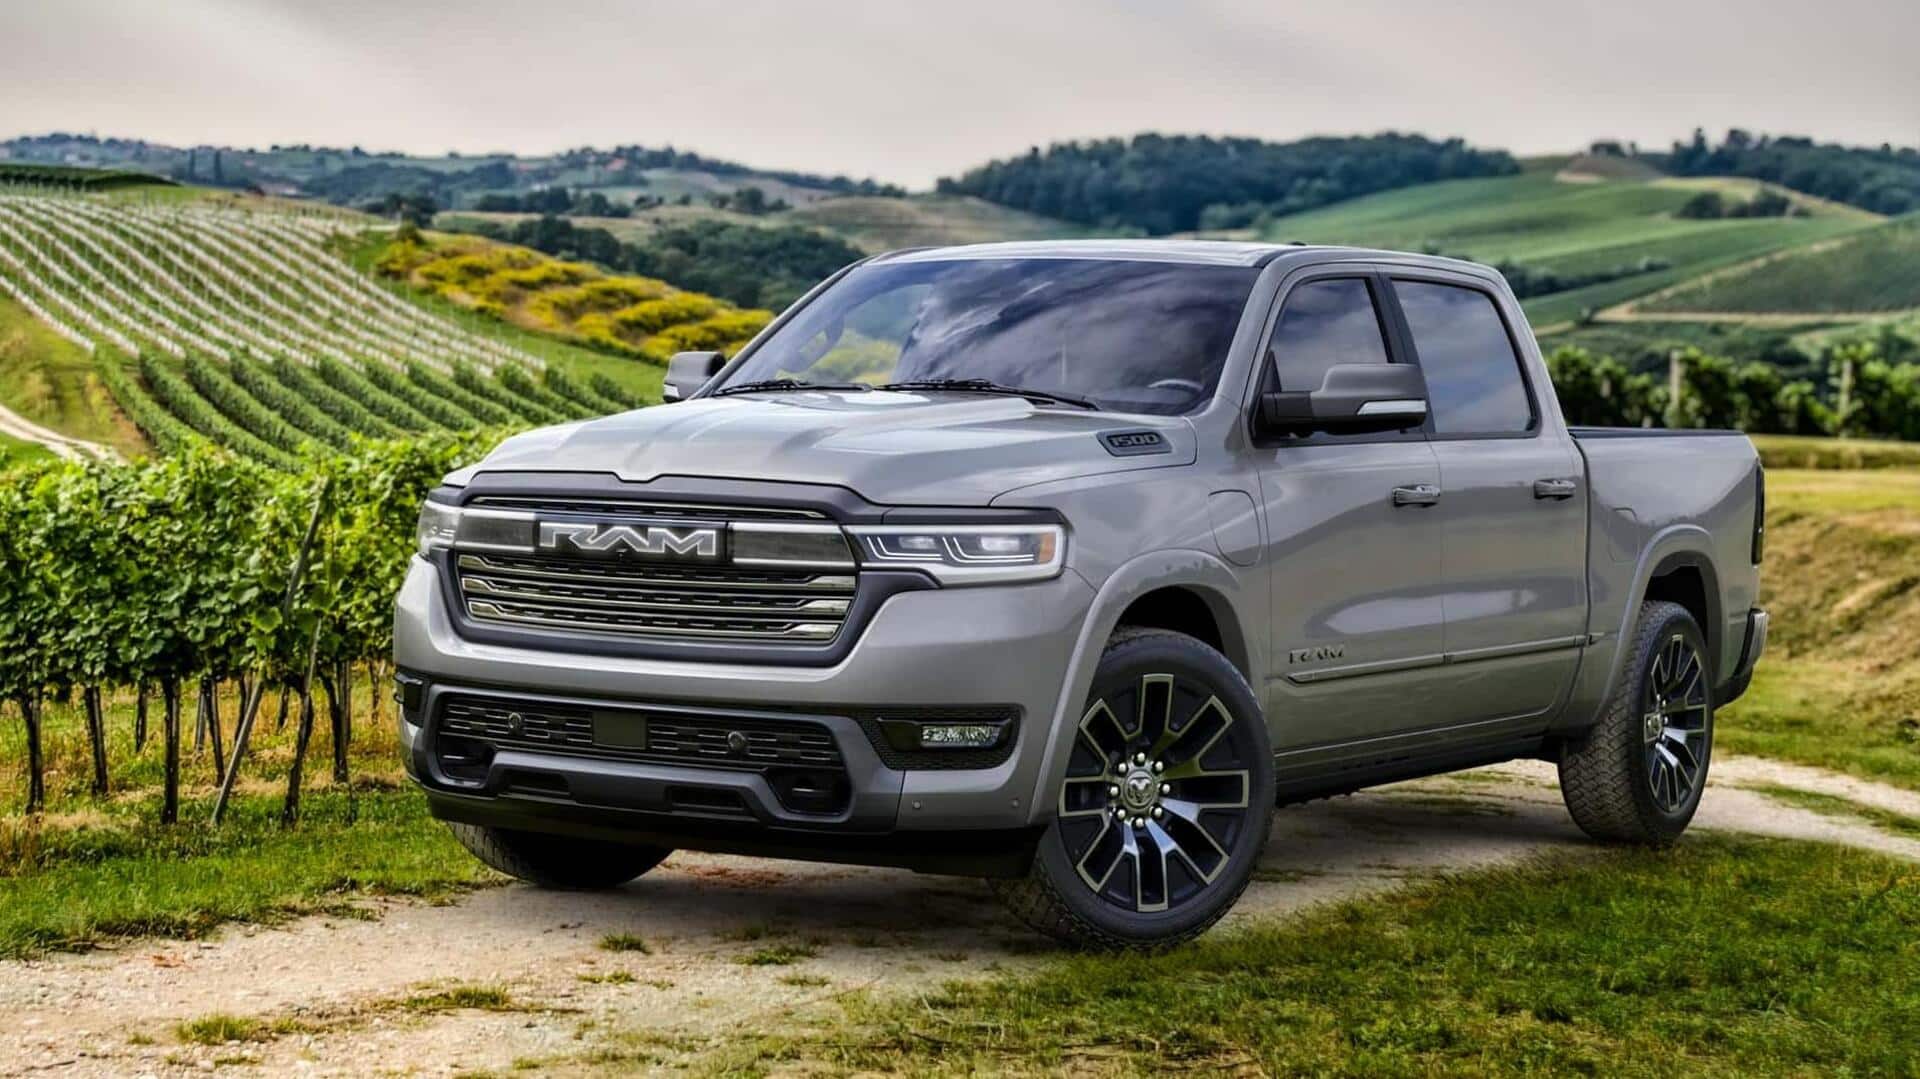 Ram introduces 2025 Ramcharger electric truck with V6 range-extender